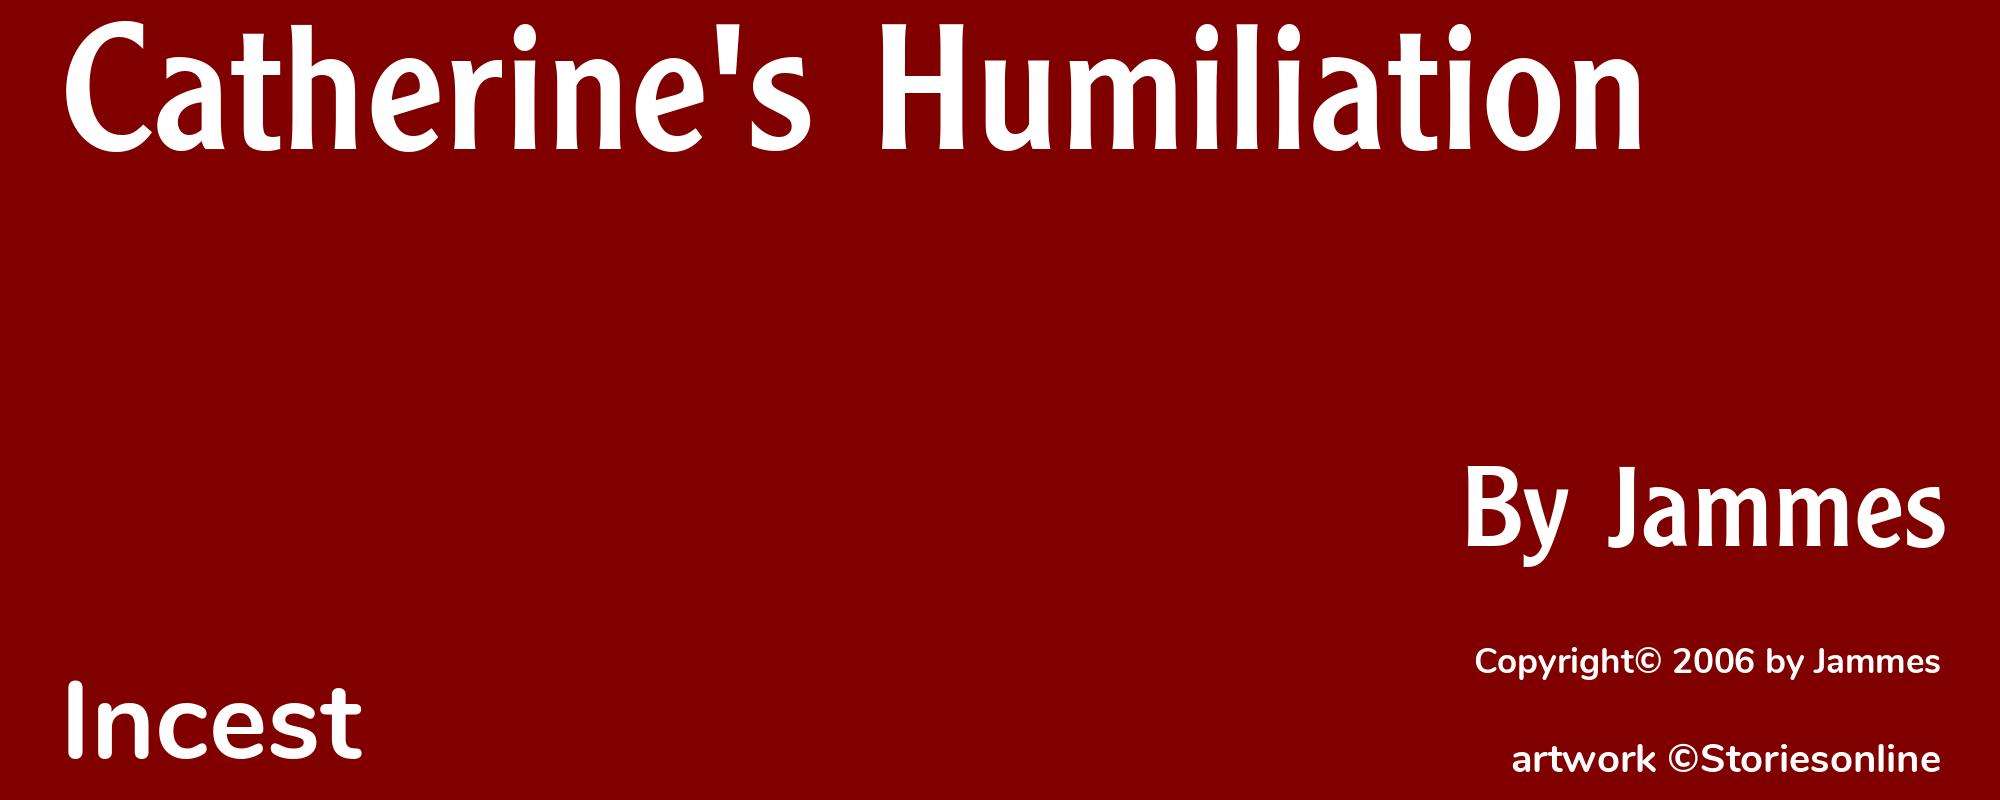 Catherine's Humiliation - Cover